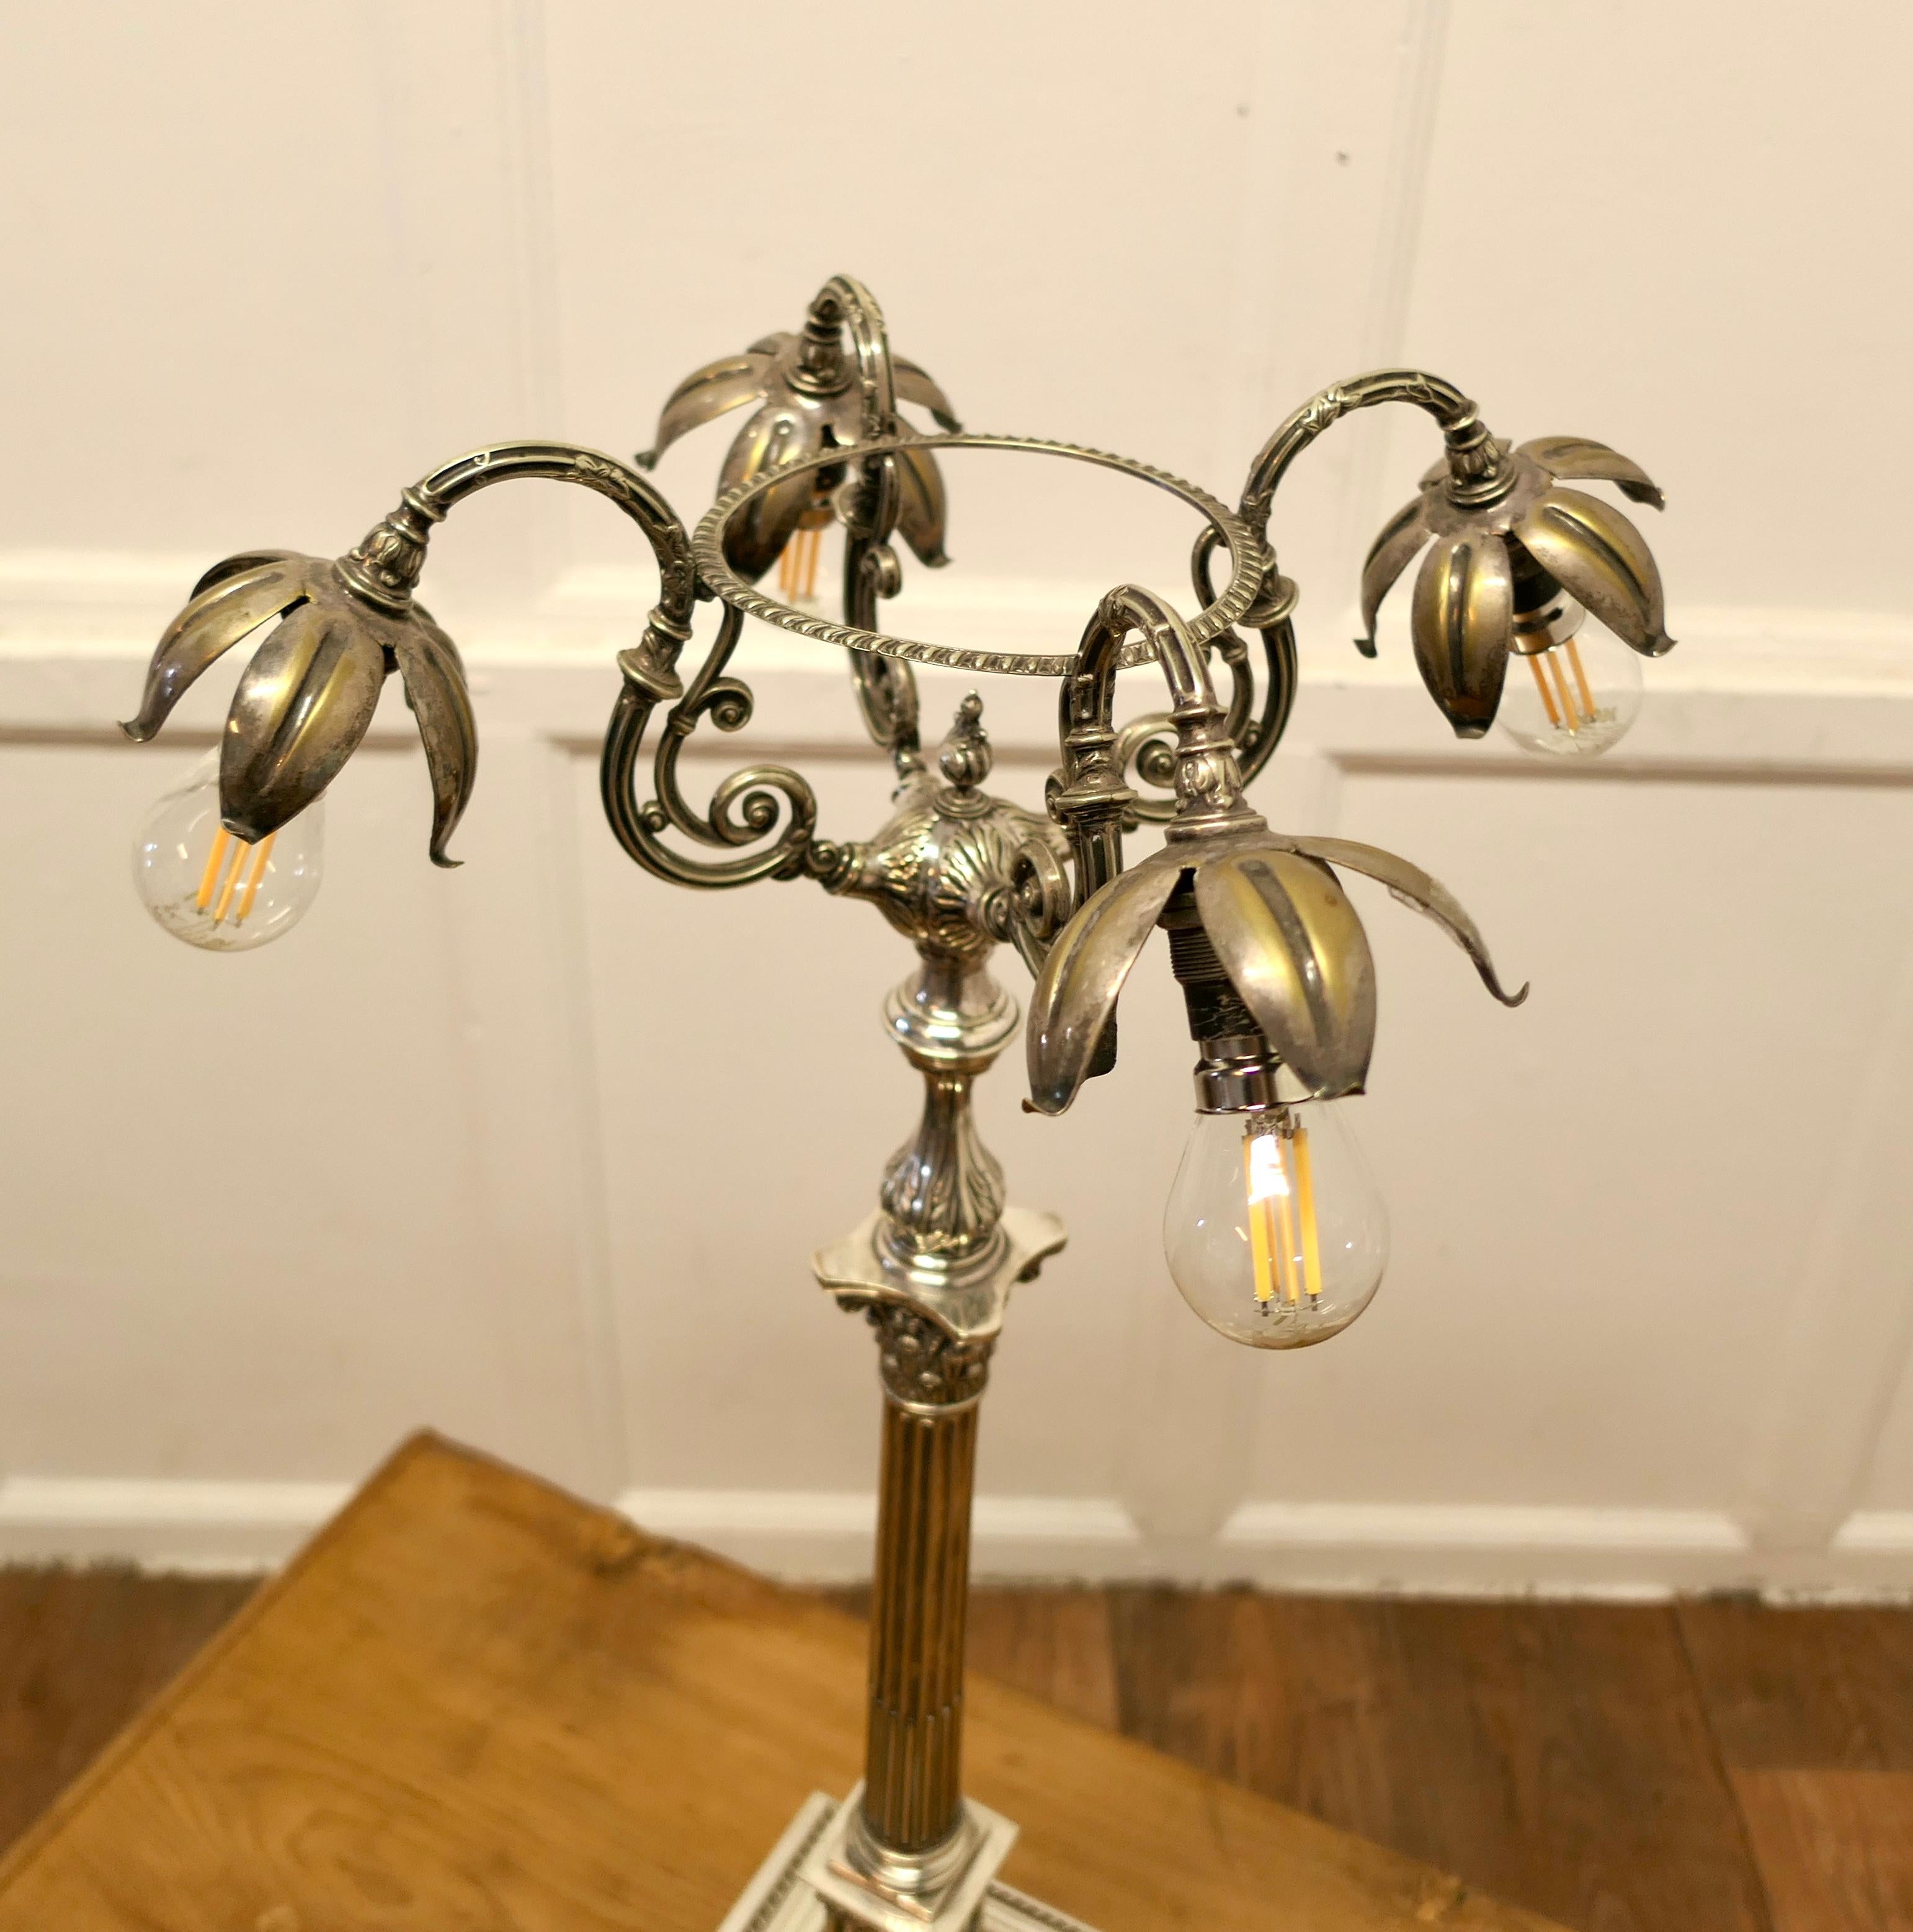 Tall Silver Plated Table Candelabra Sideboard Lamp

This is a very unusual piece, the lamp is made in heavy silver-plate, it is set on a square stepped base with a tall column supporting 4 lamps set with petal-like shades
The lamp has new wiring and